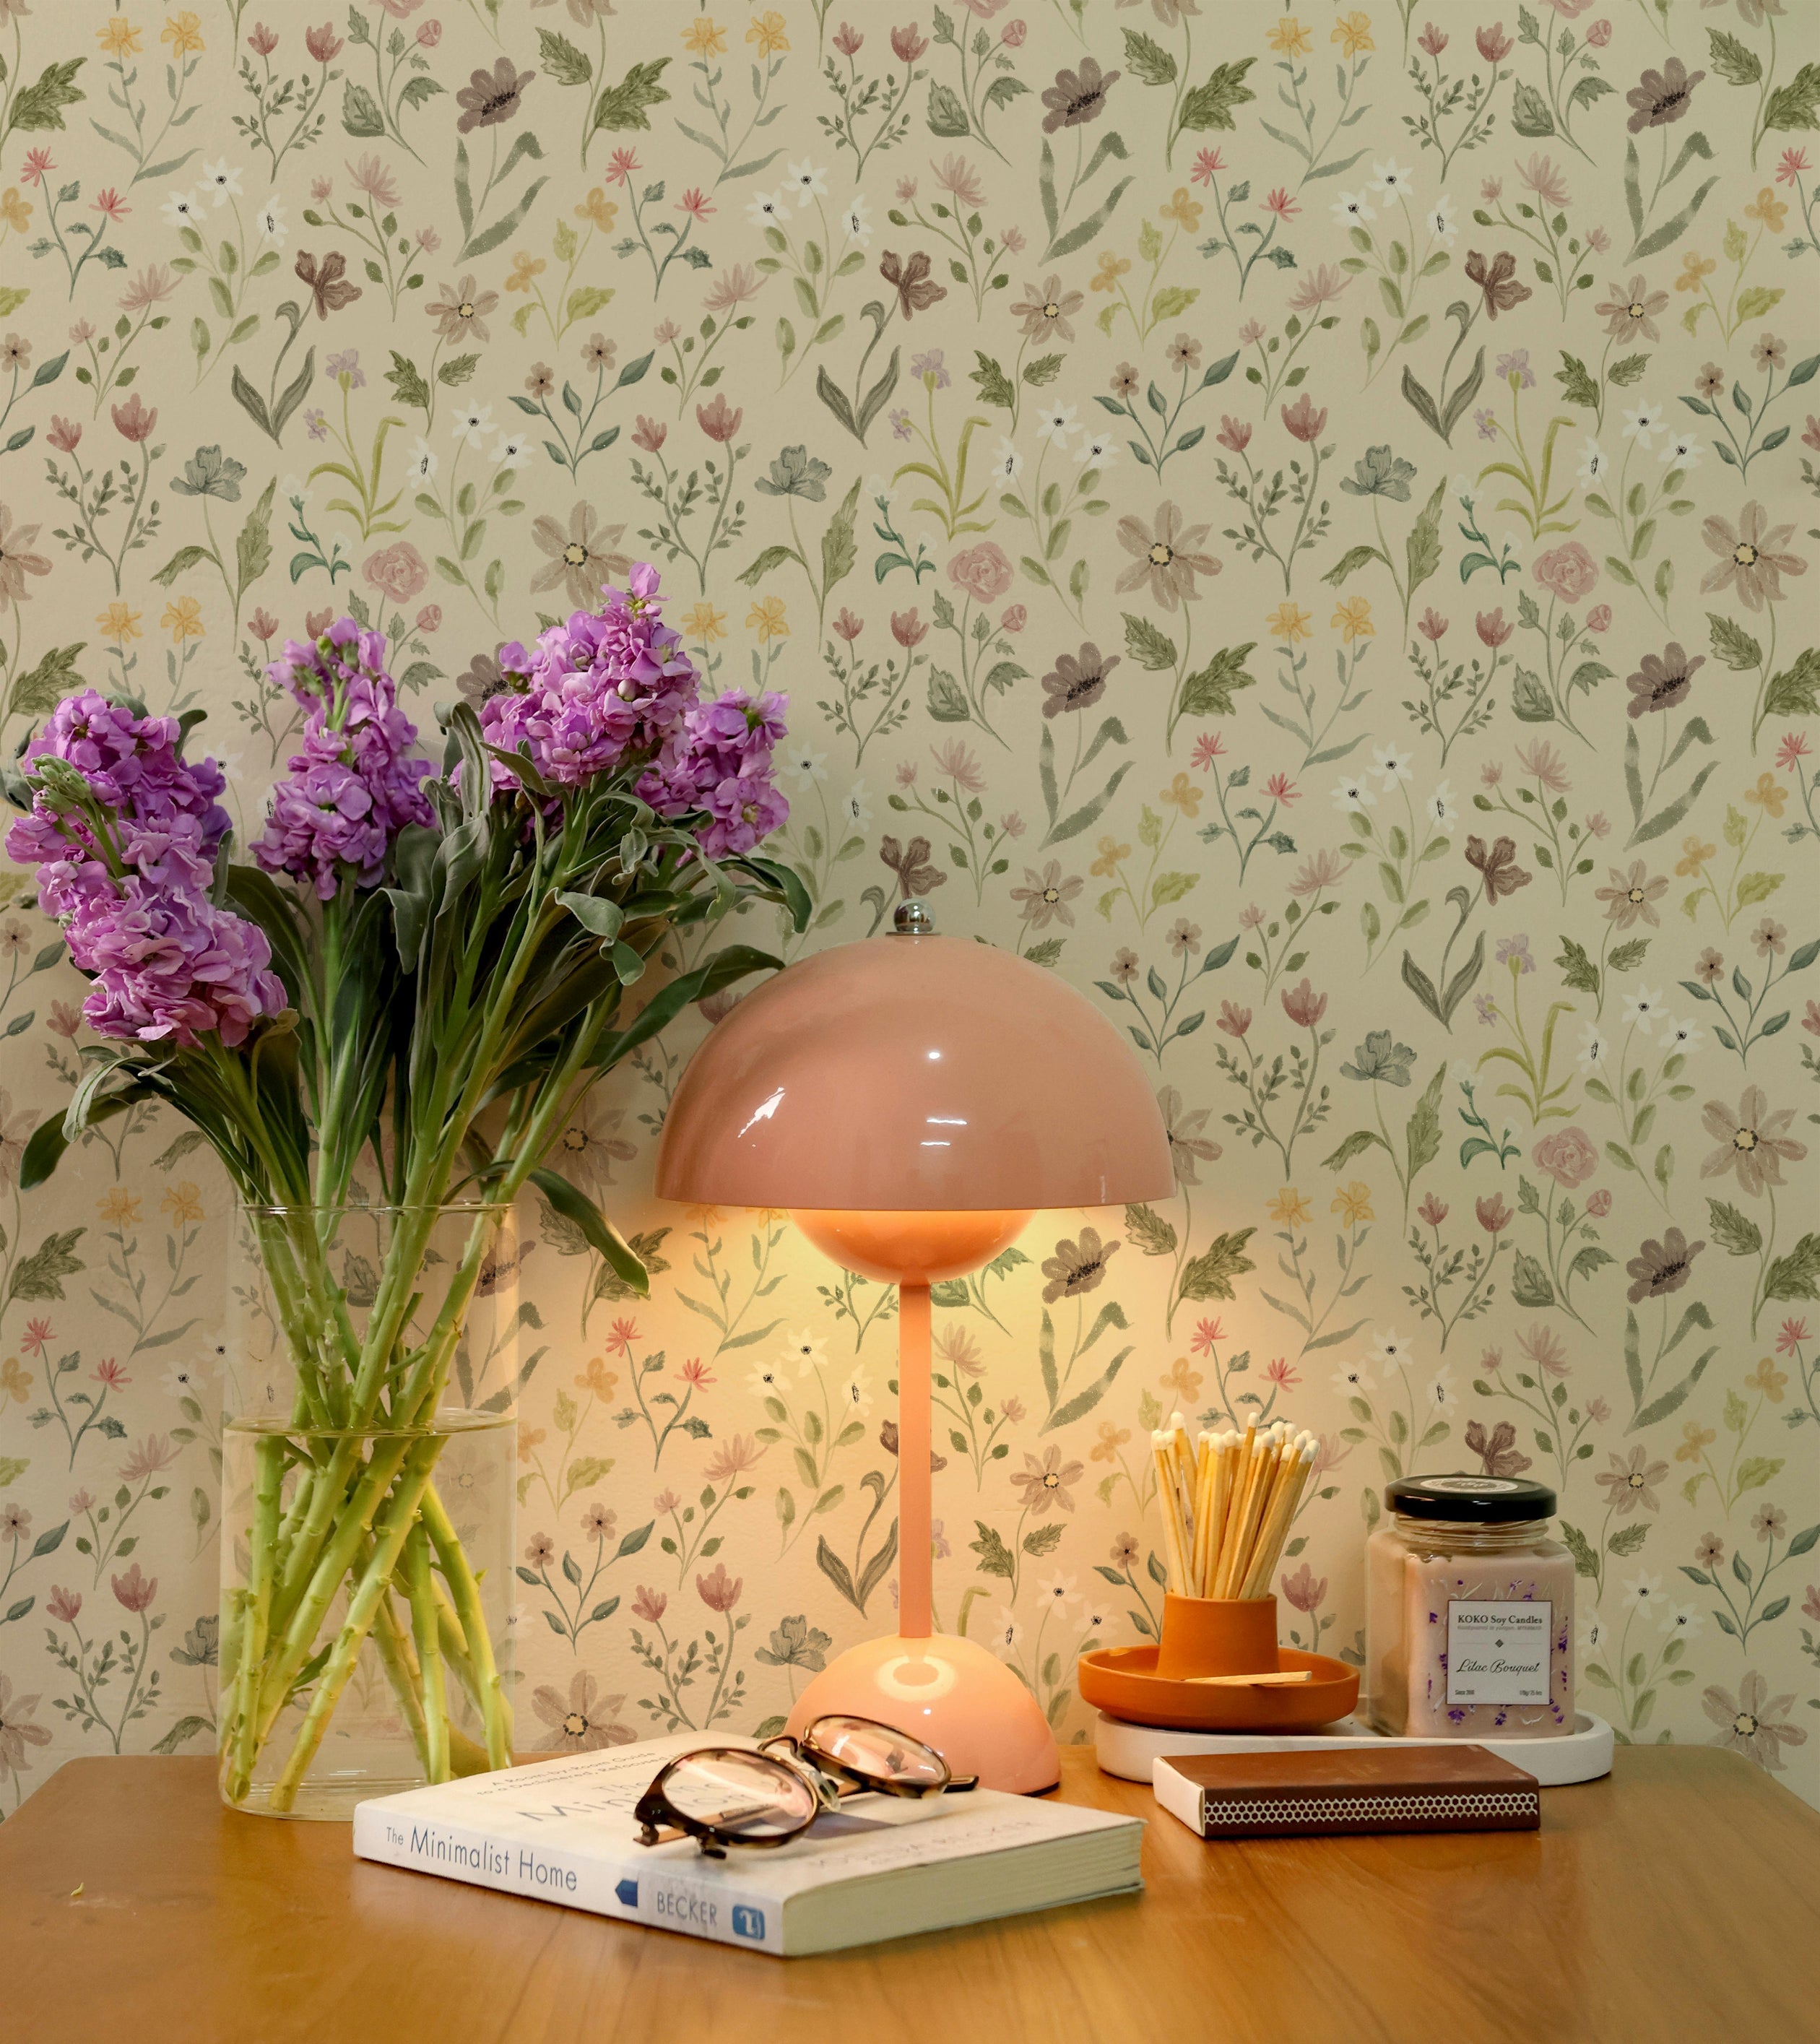 A wooden desk with a pink lamp, vase of purple flowers, books, and a candle, complemented by the Whimsy Wildflowers Wallpaper, featuring a cheerful and colorful floral design in pastels.